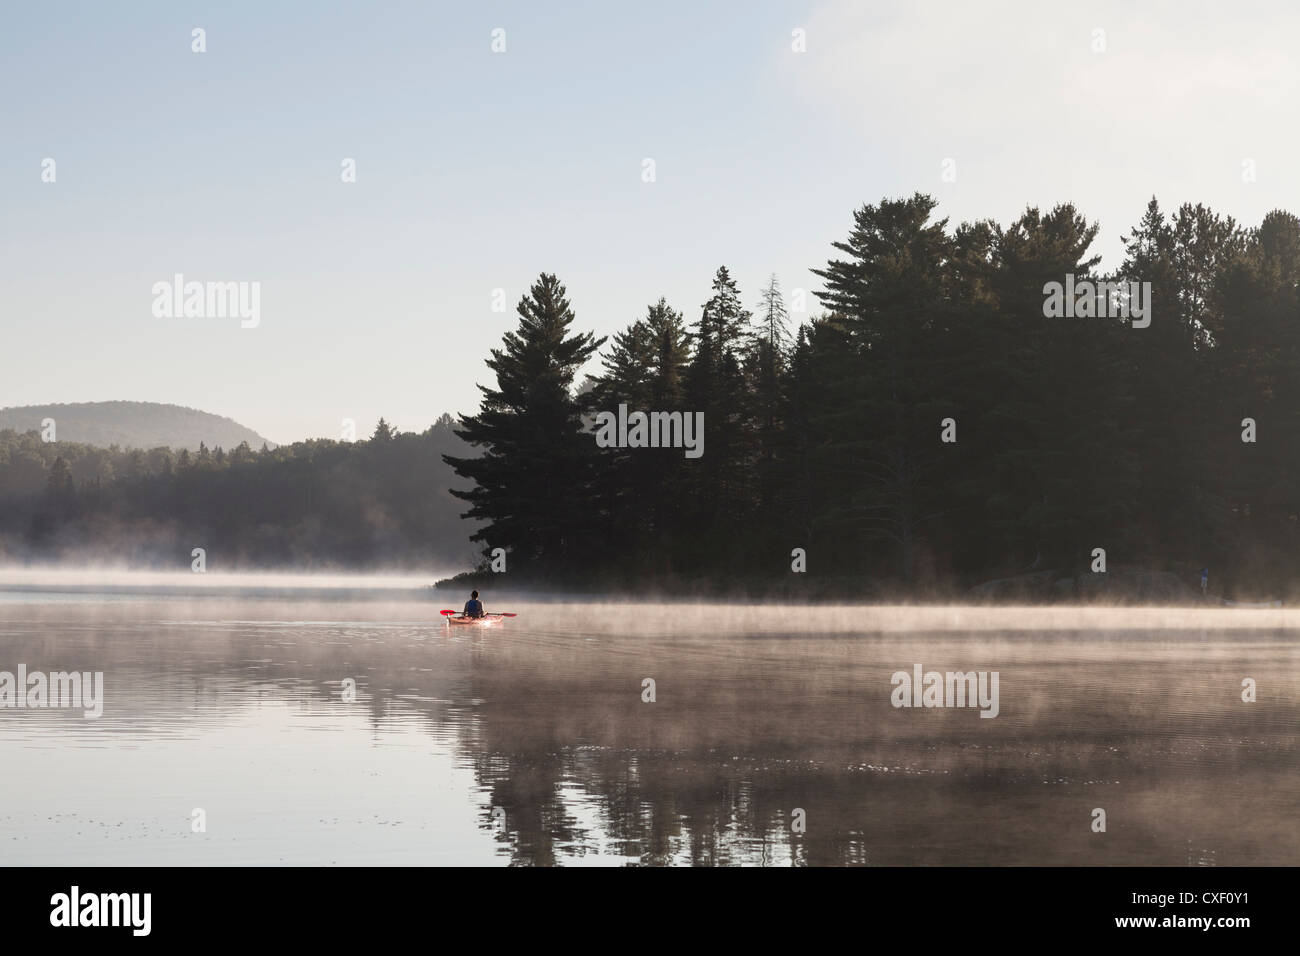 Canoe on a misty lake in  Algonquin Provincial Park, Ontario, Canada Stock Photo